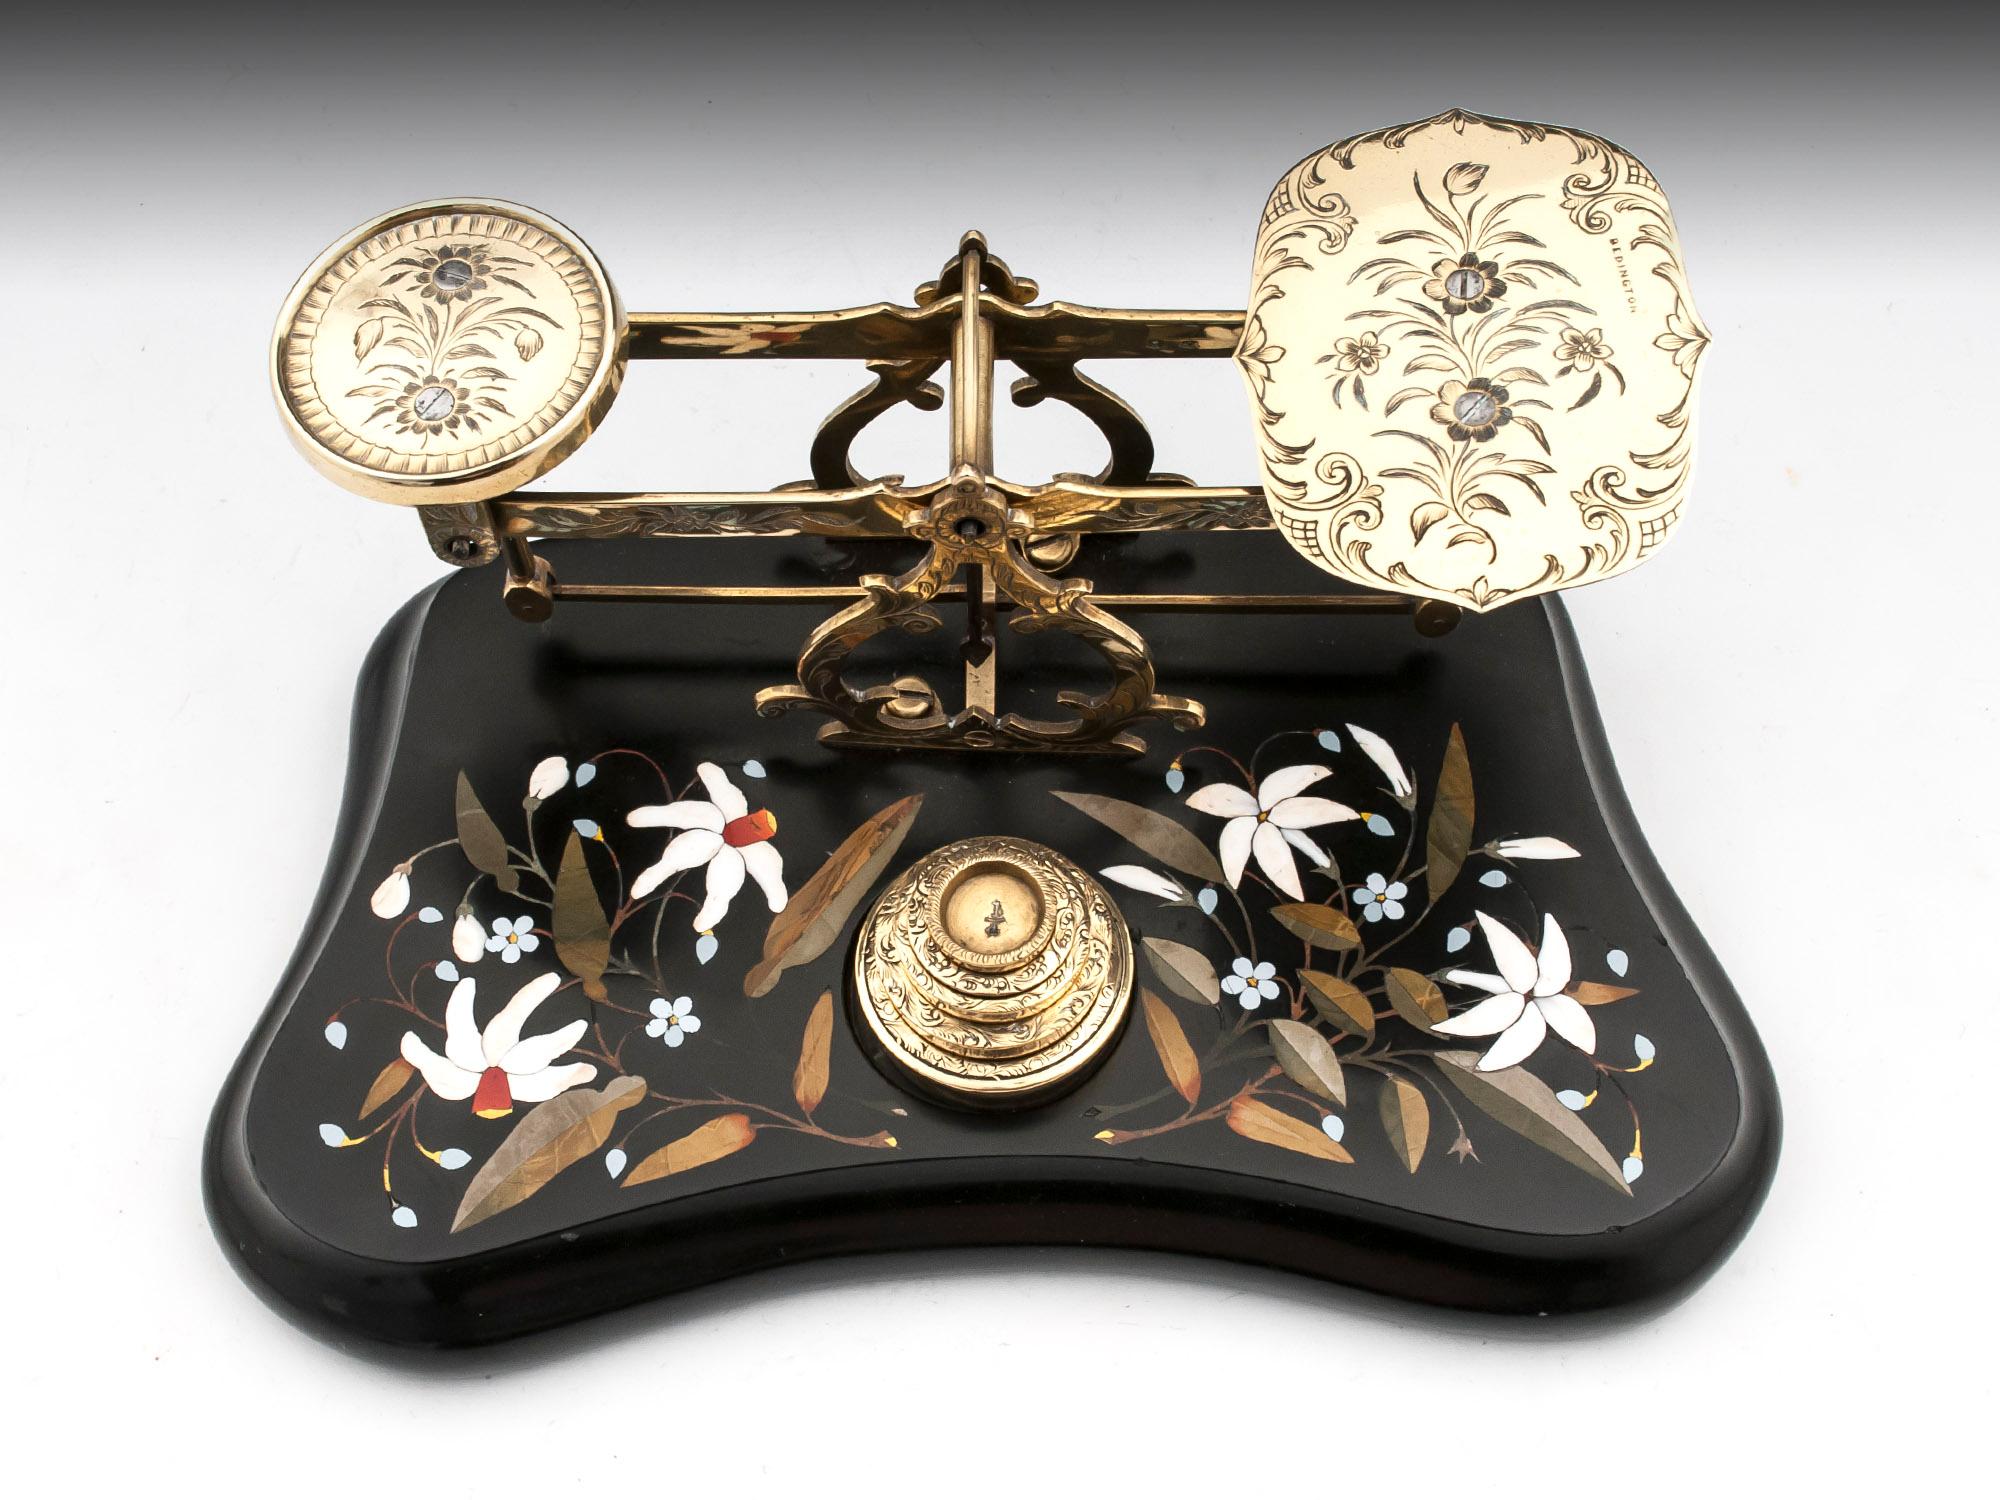 Antique brass engraved postal scales with an elaborate inlaid Ashford marble base and engraved weights.